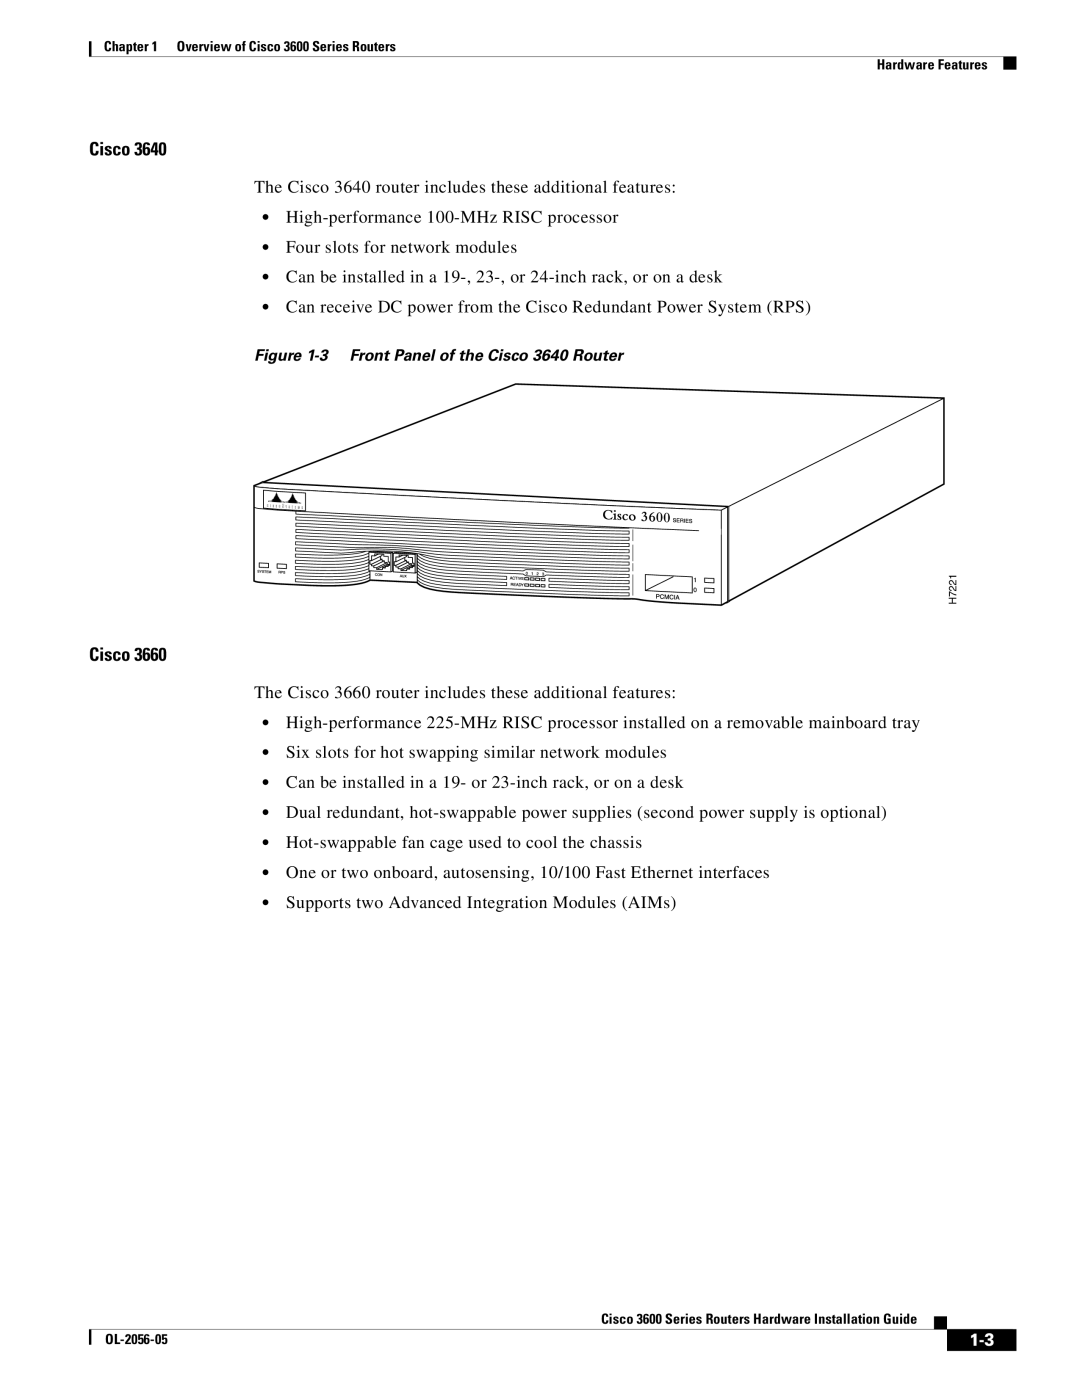 Cisco Systems 3600 specifications 3 Front Panel of the Cisco 3640 Router, H7221 